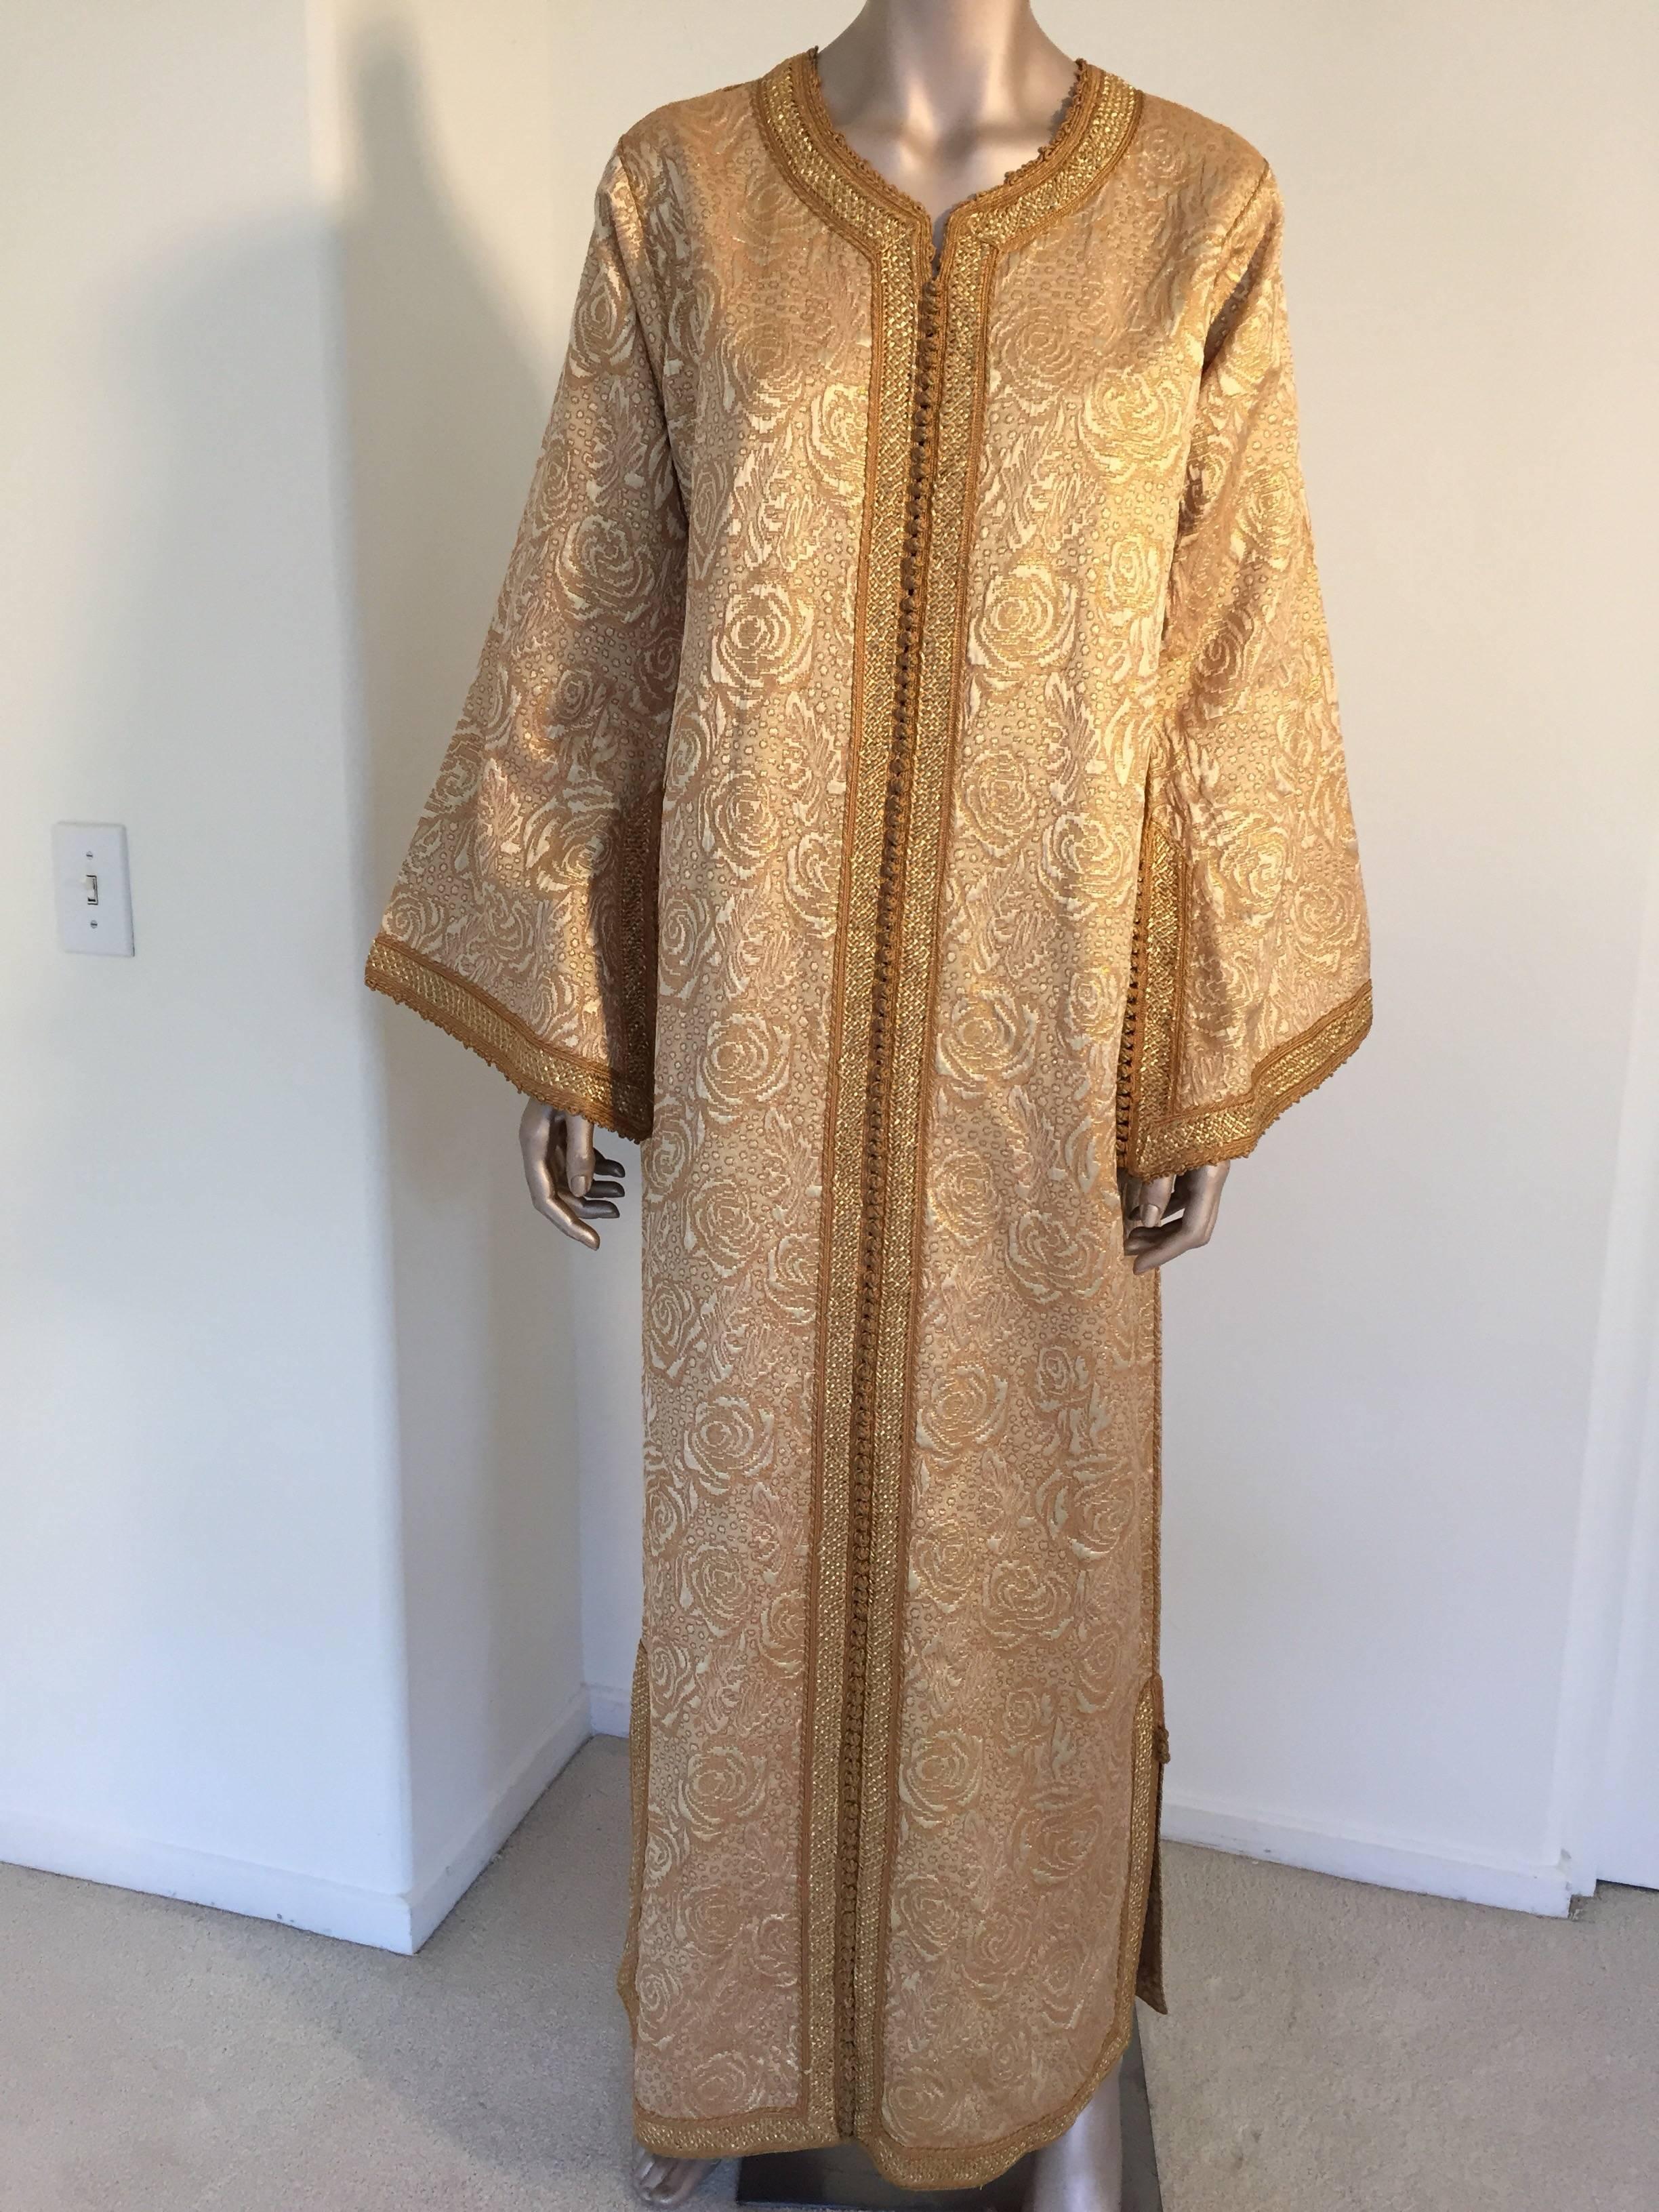 Moroccan evening or interior bronze gold metallic floral brocade dress kaftan with gold trim.
Handmade ceremonial caftan from North Africa, Morocco.
Vintage exotic 1970s metallic purple brocade caftan gown.
The luminous bronze, cream and gold